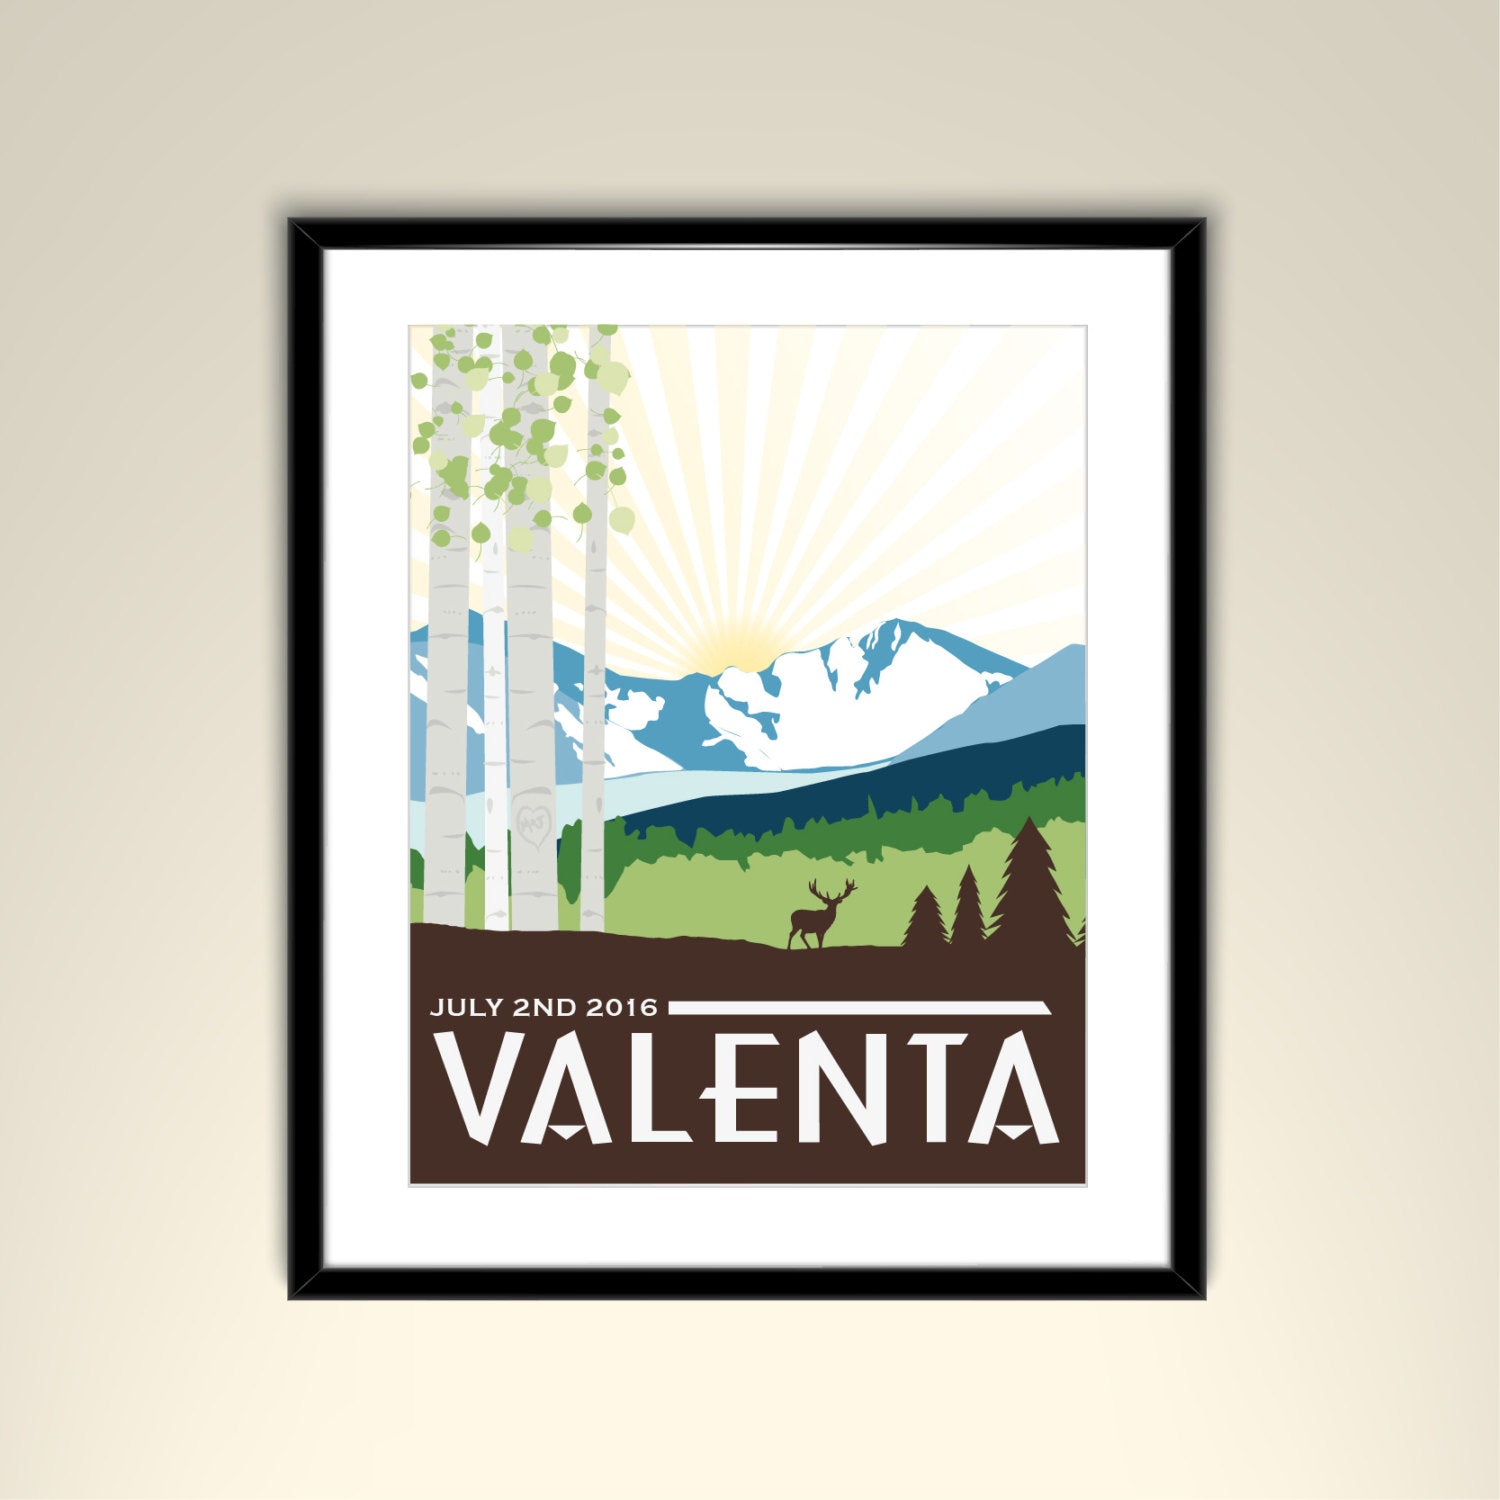 Longs Peak Spring Colorado Vintage Travel 11x14 Poster - Wedding Poster personalized with Names and date (frame not included)